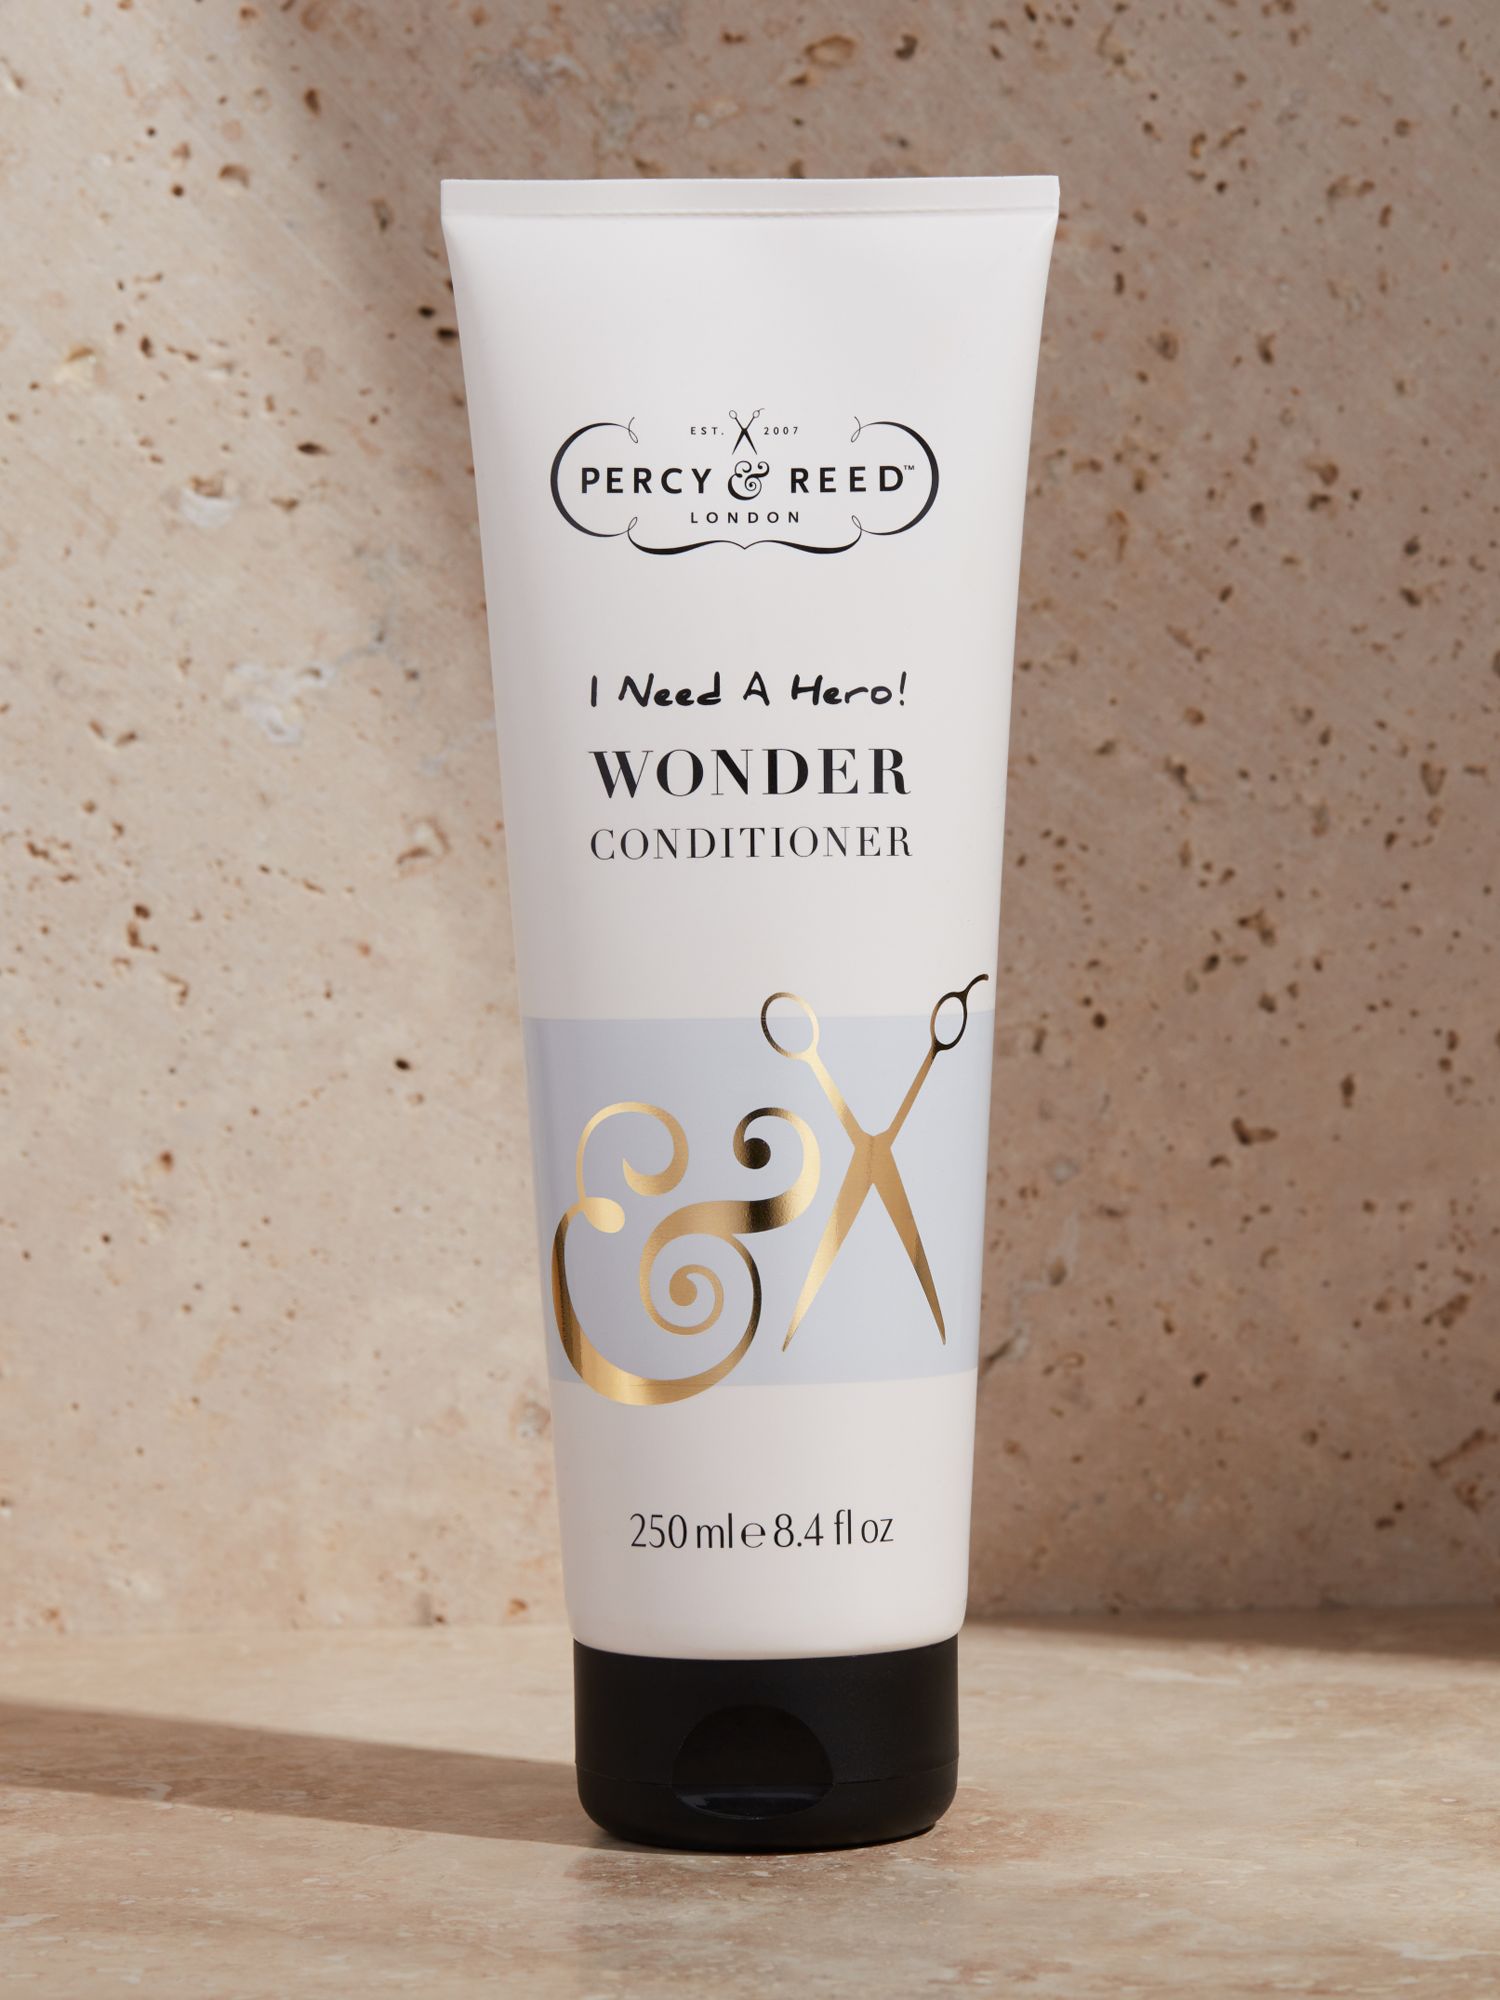 Percy & Reed I Need A Hero! Wonder Conditioner, 250ml 2